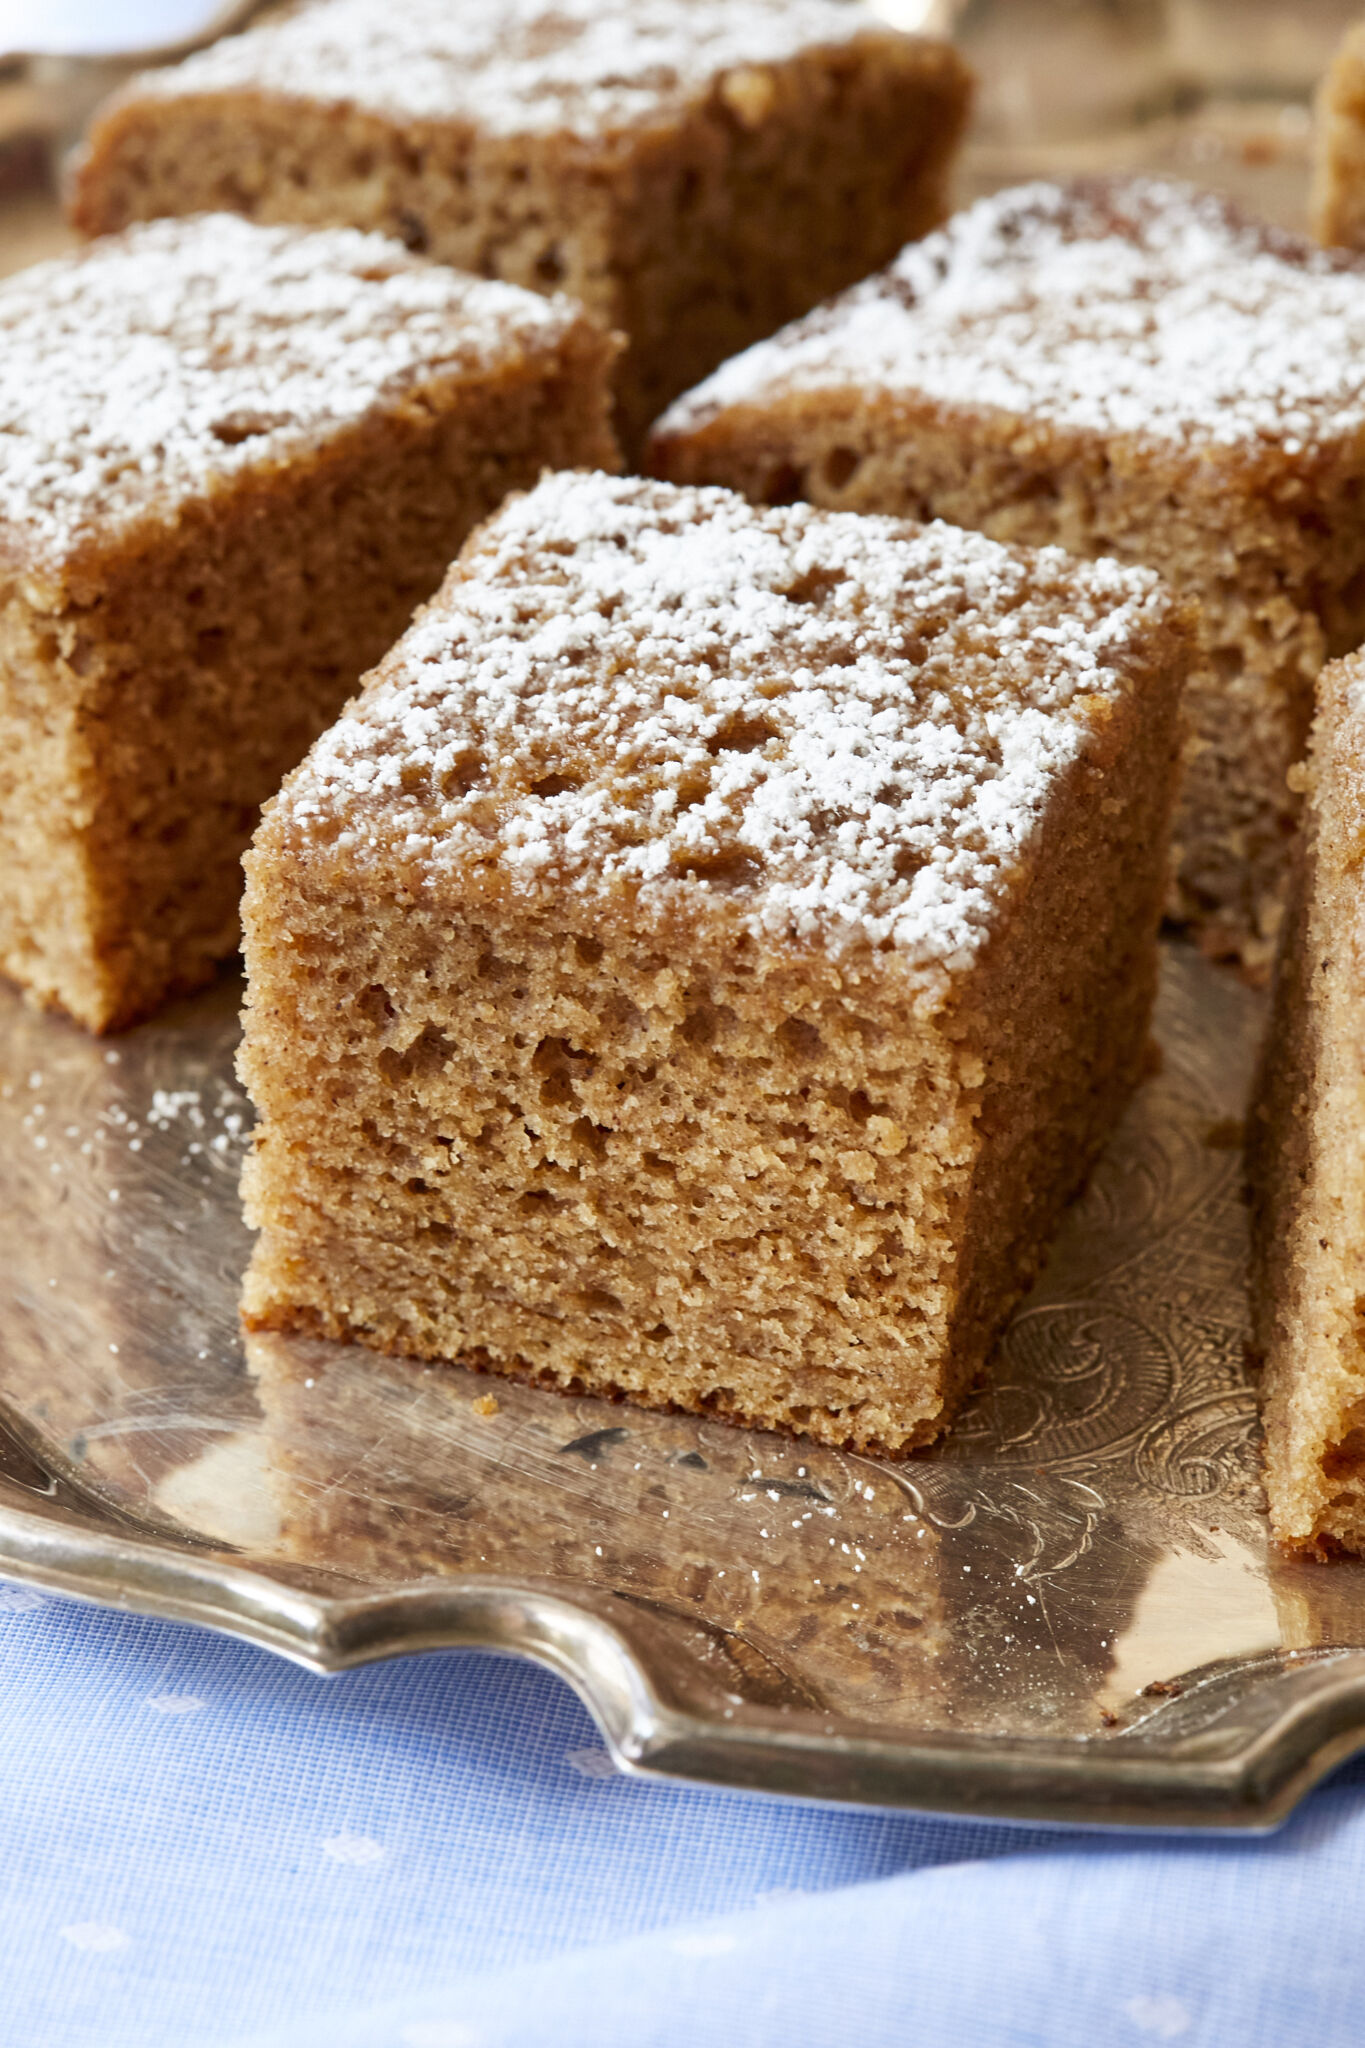 A Traditional Irish Spice Cake is cut into generous squares and served on a silver platter. They have delectably moist, fine crumb and are dusted with powdered sugar.